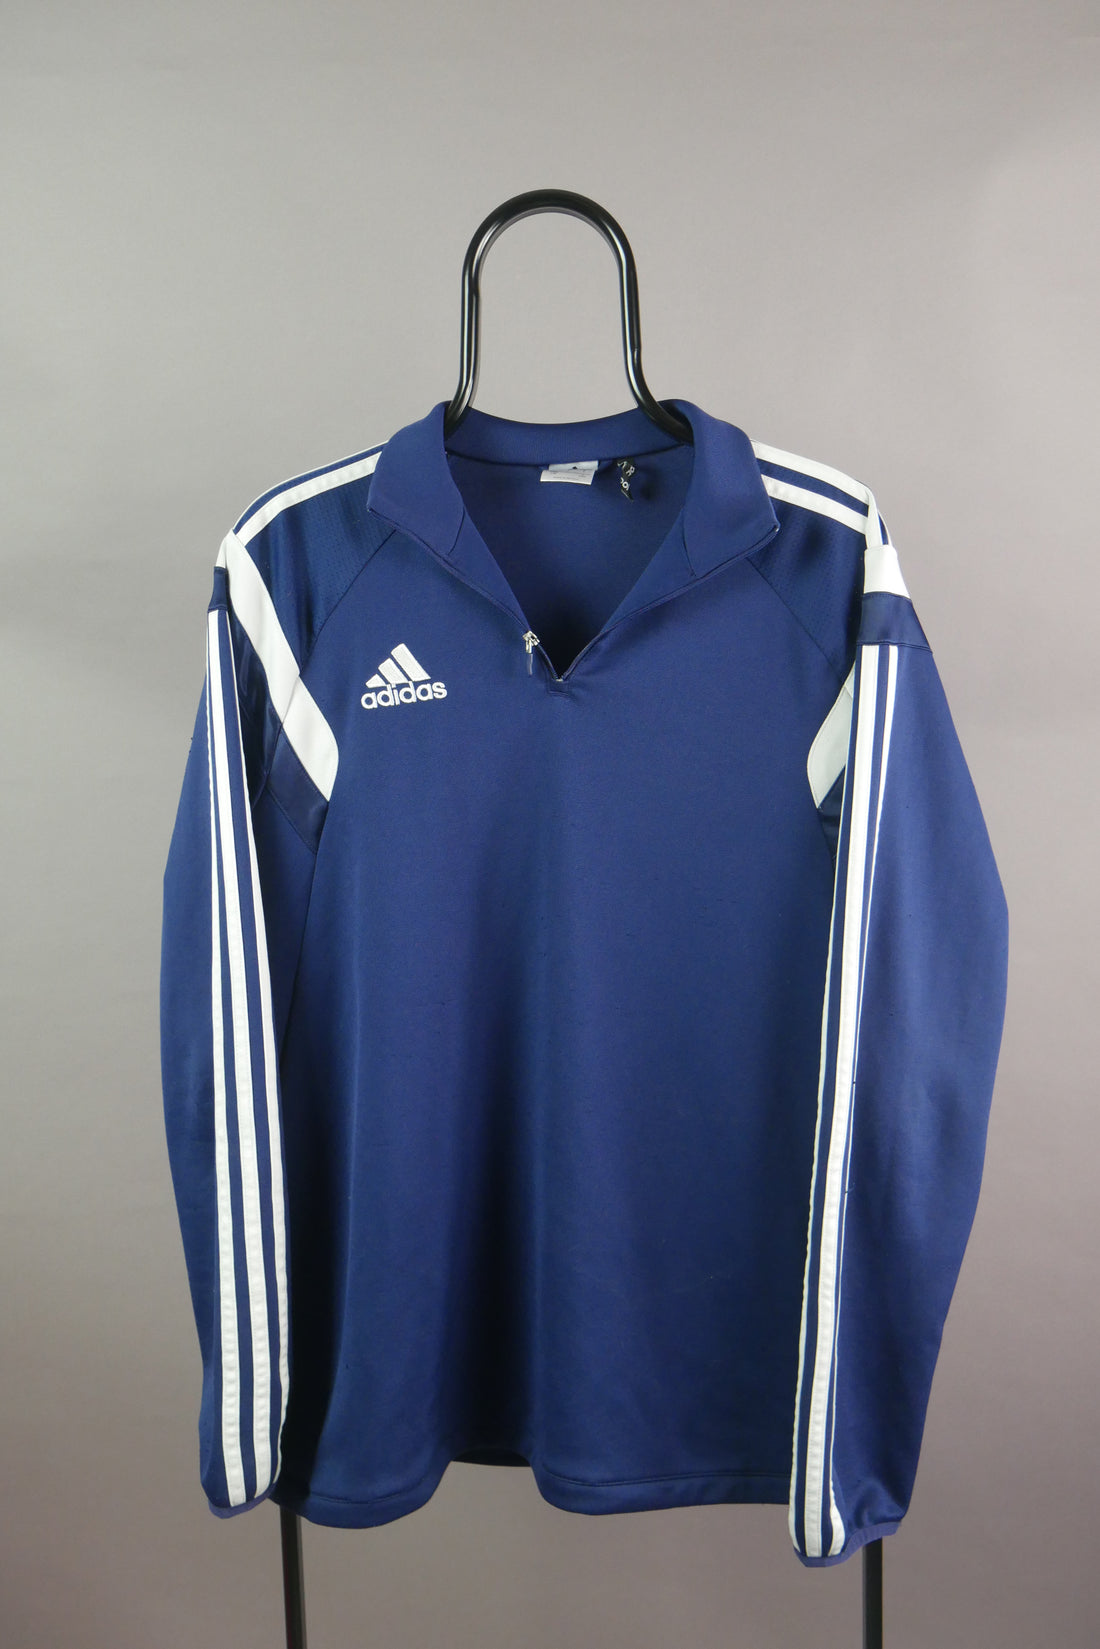 The Adidas Embroidered 1/4 Zip Sweater (L)